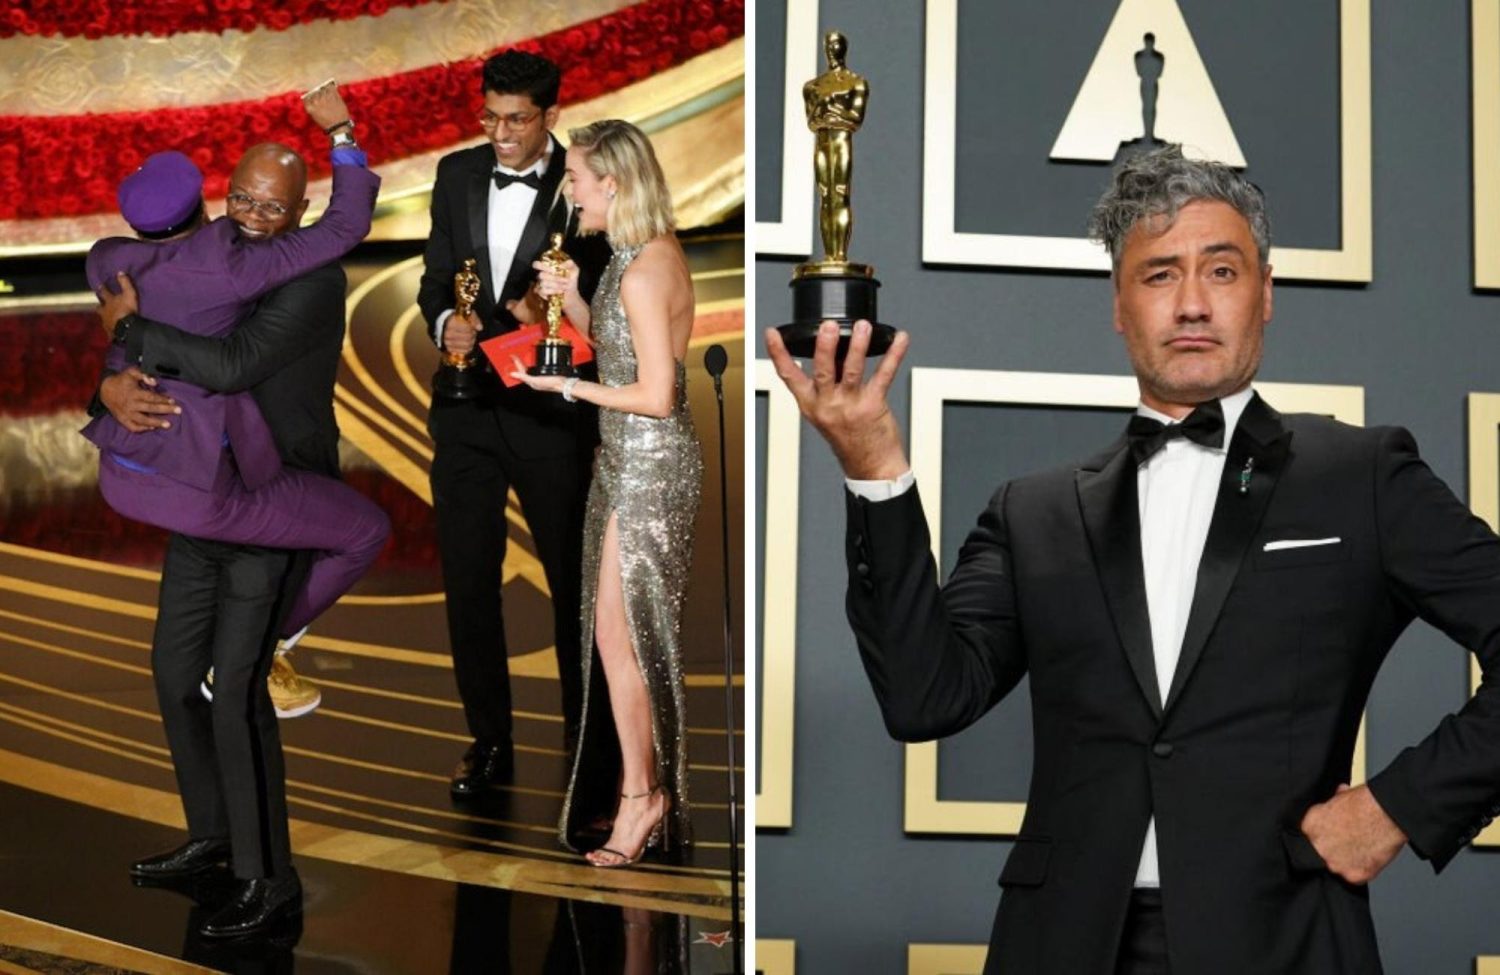 10 Categories That The Academy Awards Should Add, According To Reddit